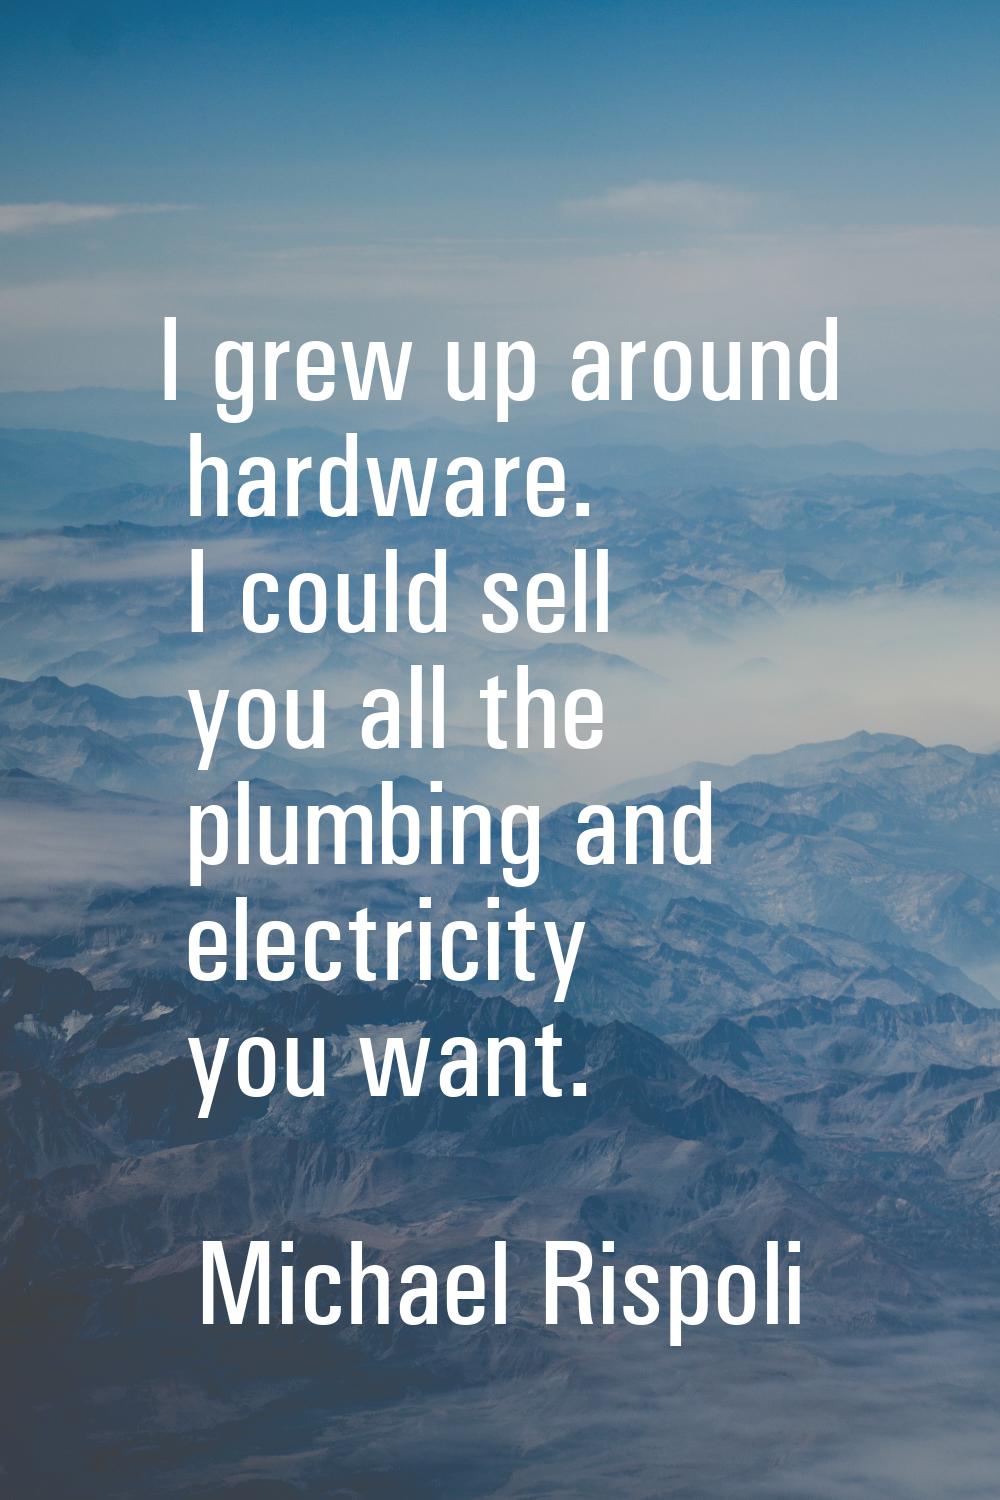 I grew up around hardware. I could sell you all the plumbing and electricity you want.